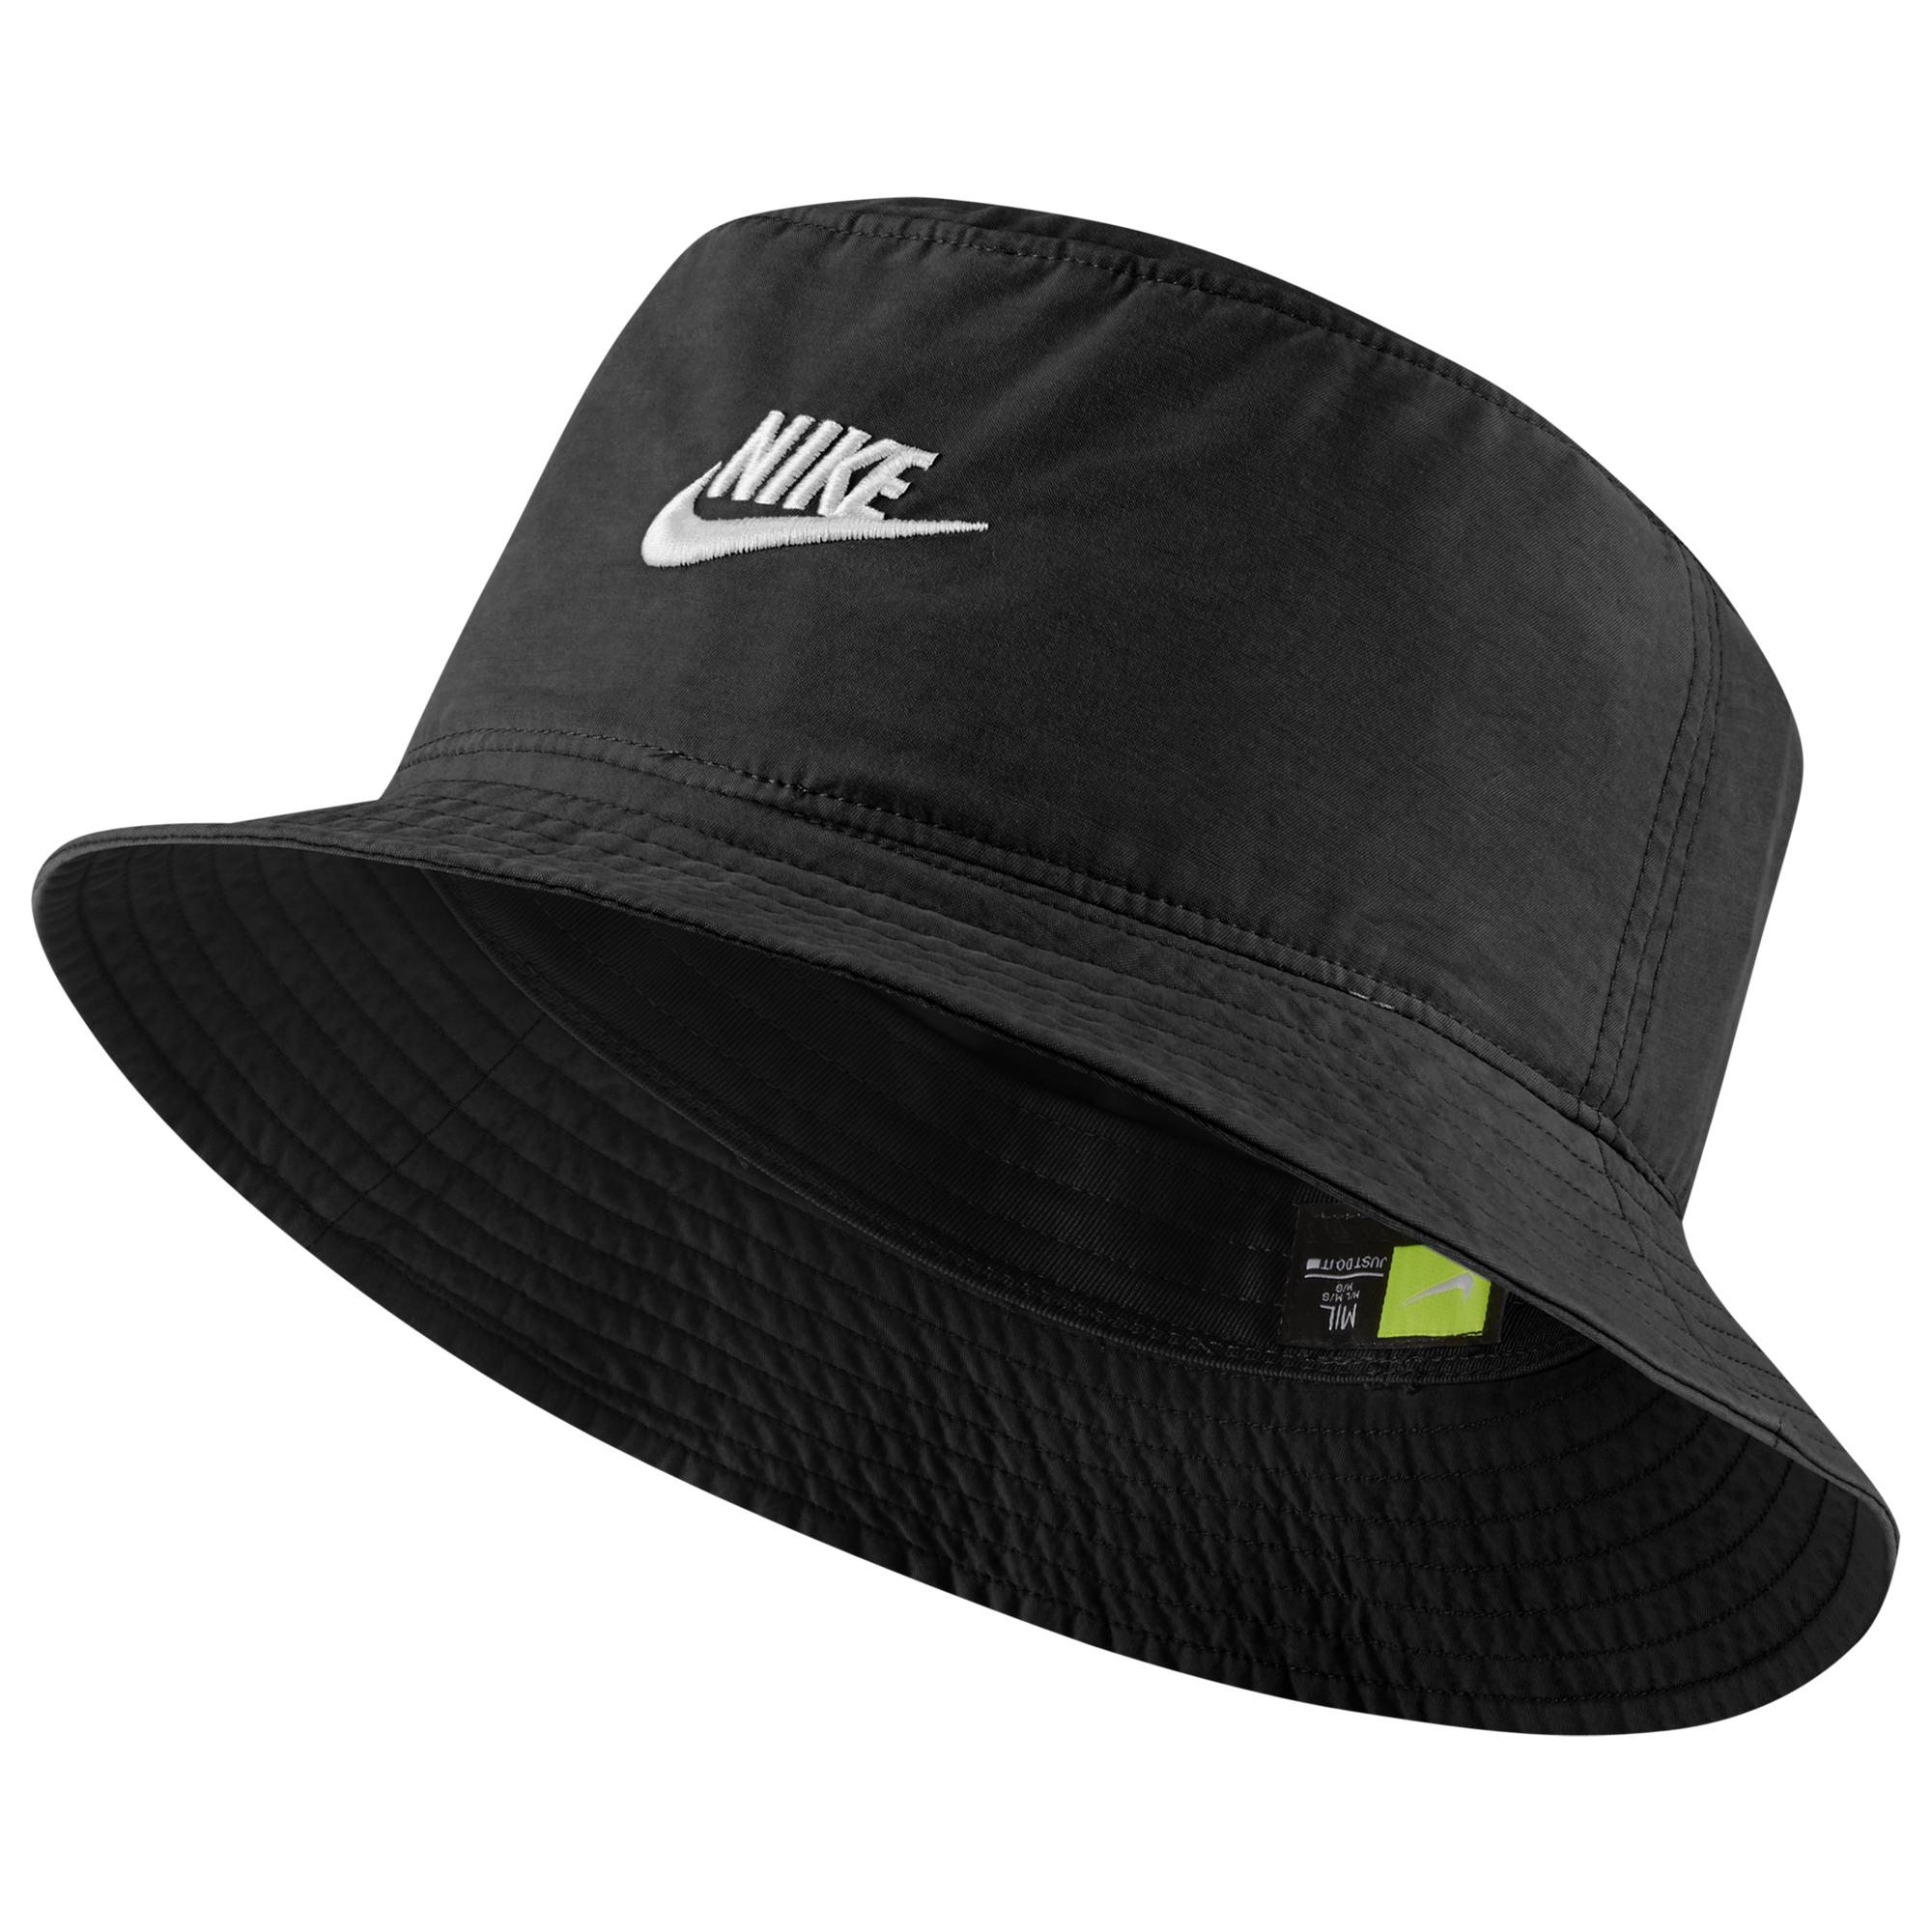 Nike Cotton Washed Bucket Hat in Black for Men - Lyst